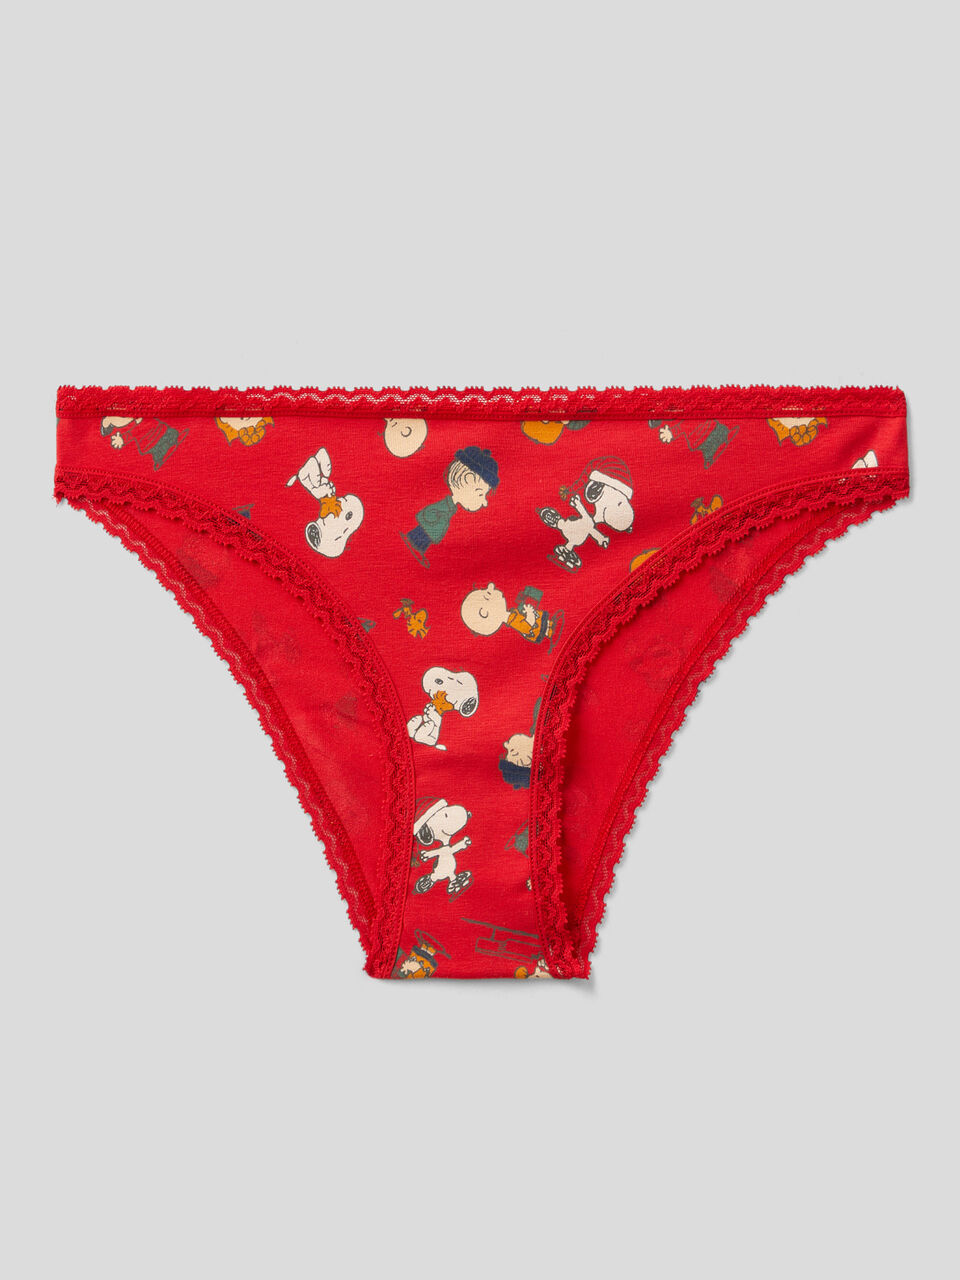 NWT Briefly Stated Women's Peanuts Snoopy Hipster Panty Red Valentines XS S  M L